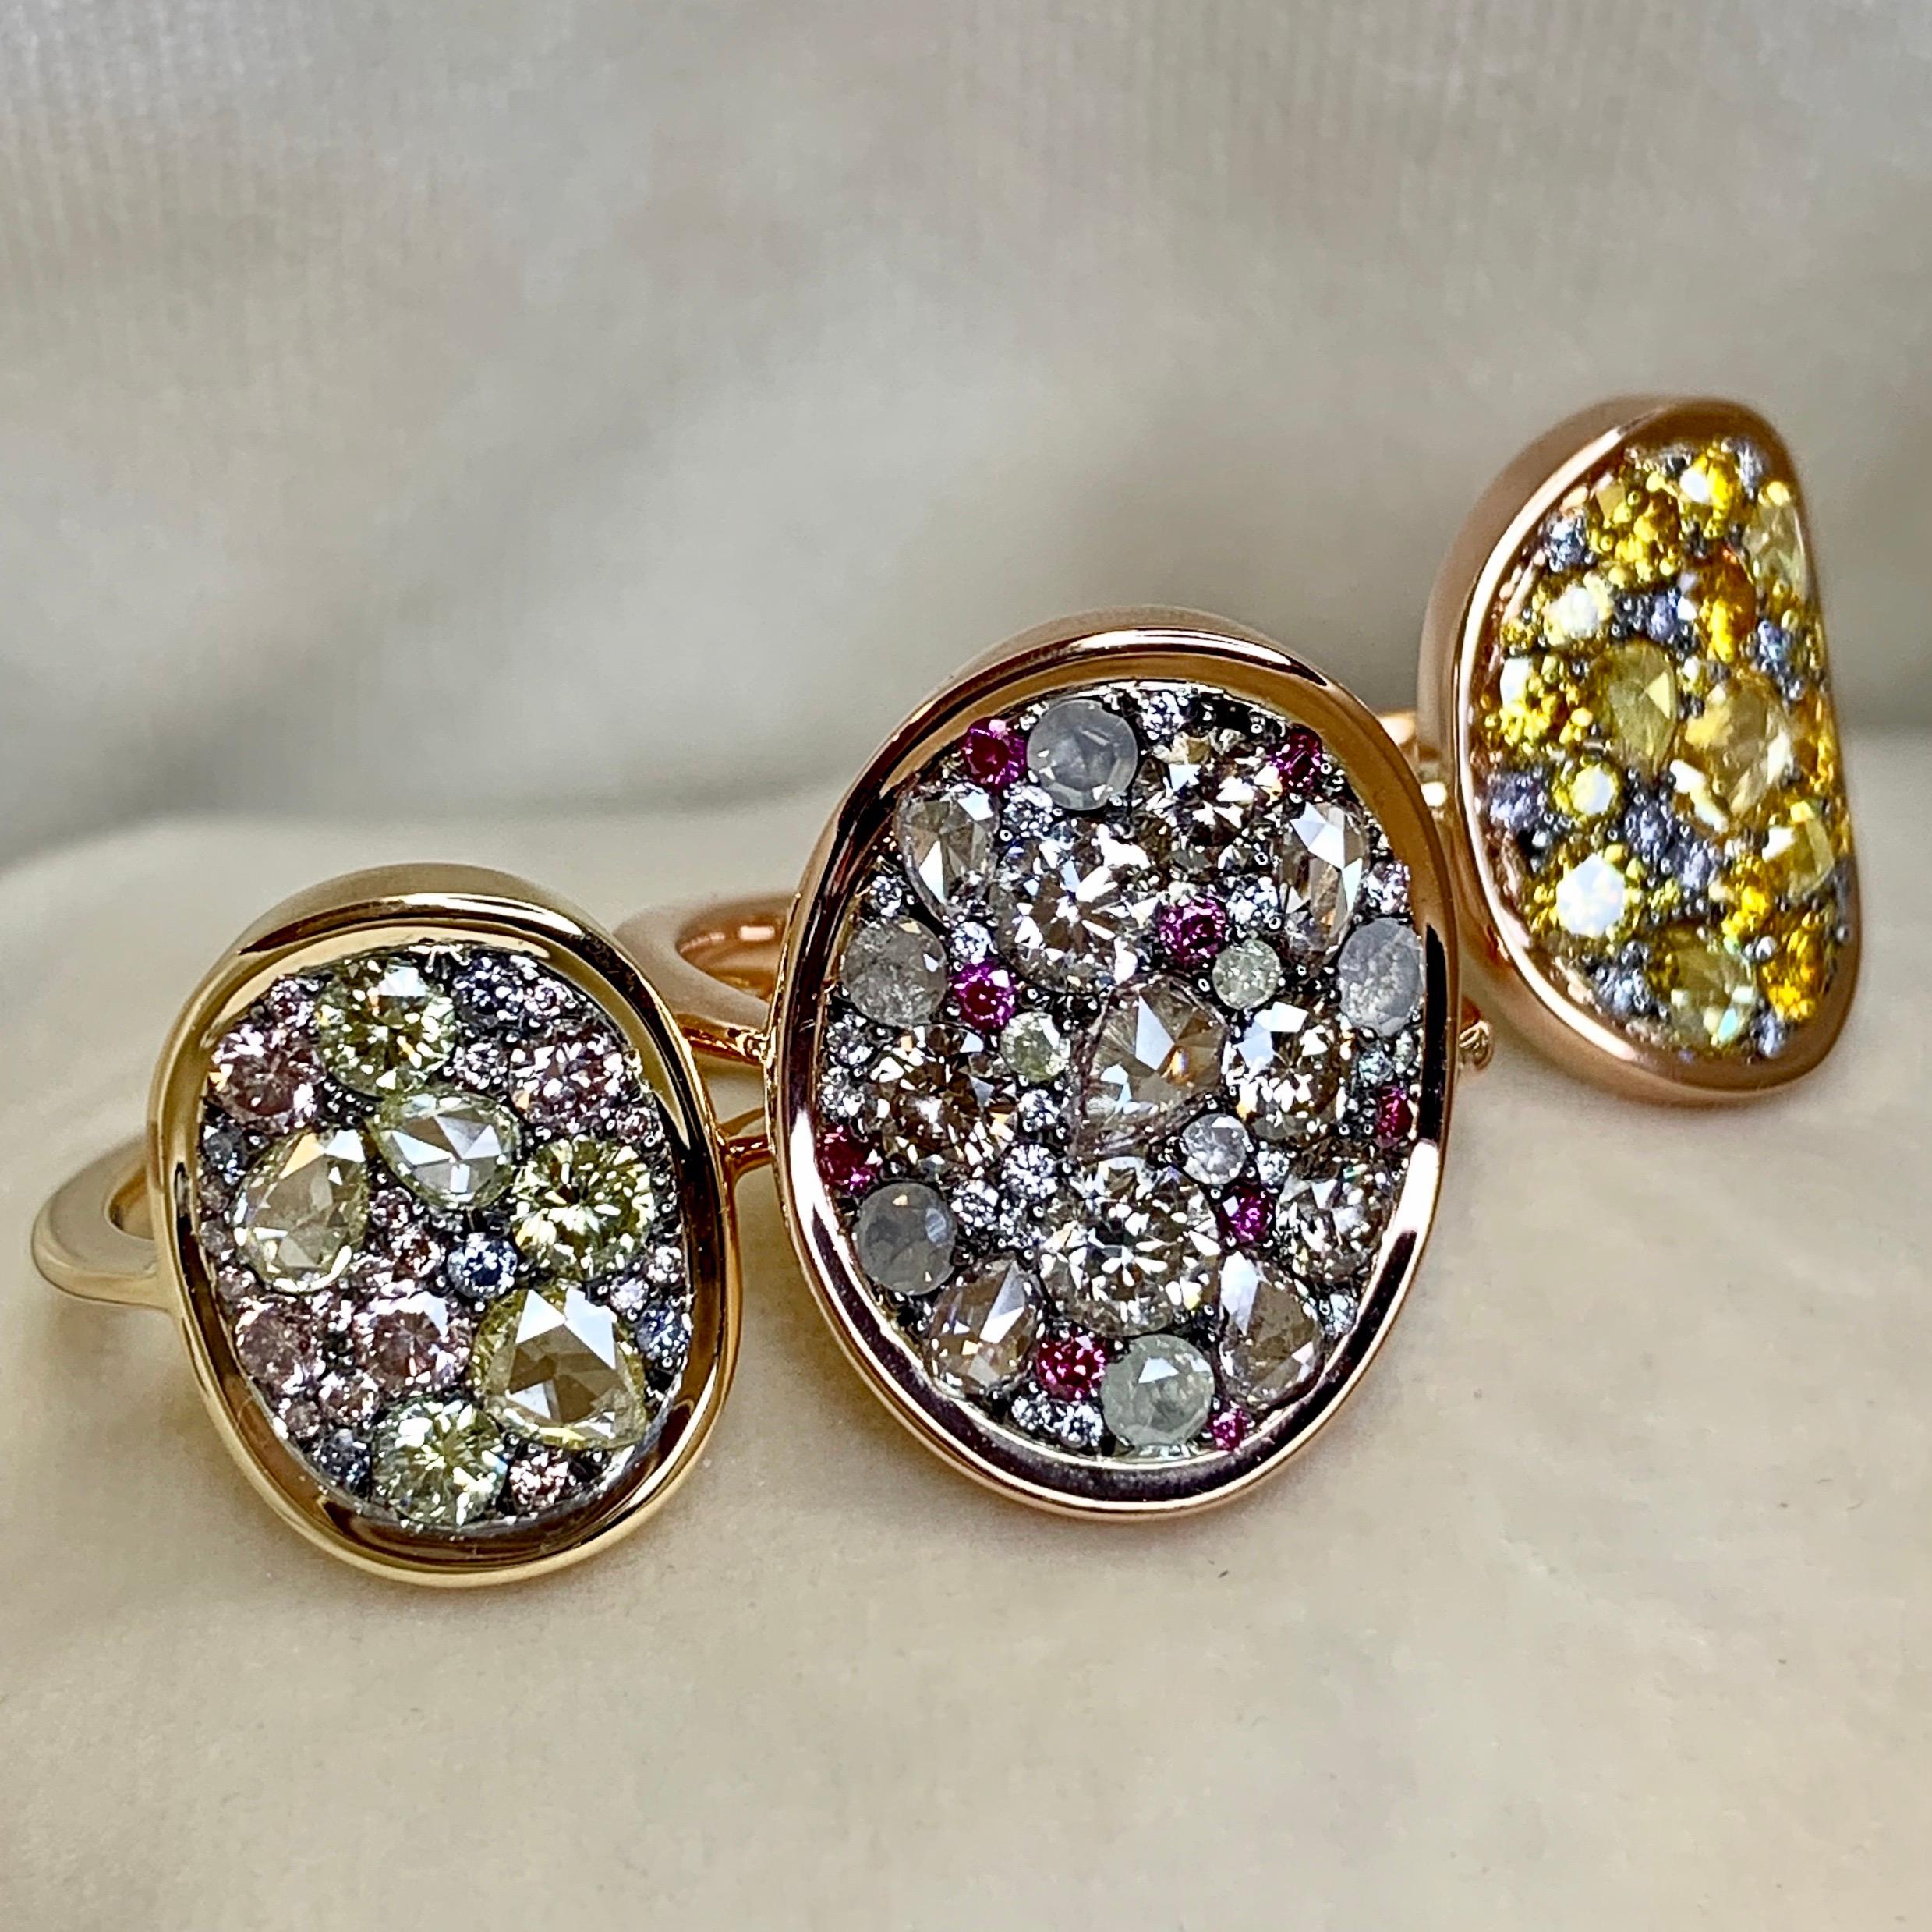 One of a kind ring in 18K yellow gold 4,3 g & blackened sterling silver (The stones are set on silver to create a black background for the stones)
Set with Fancy lemon yellow rose-cut diamonds, Fancy Pink, Blue & lemon Yellow brilliant-cut diamonds.